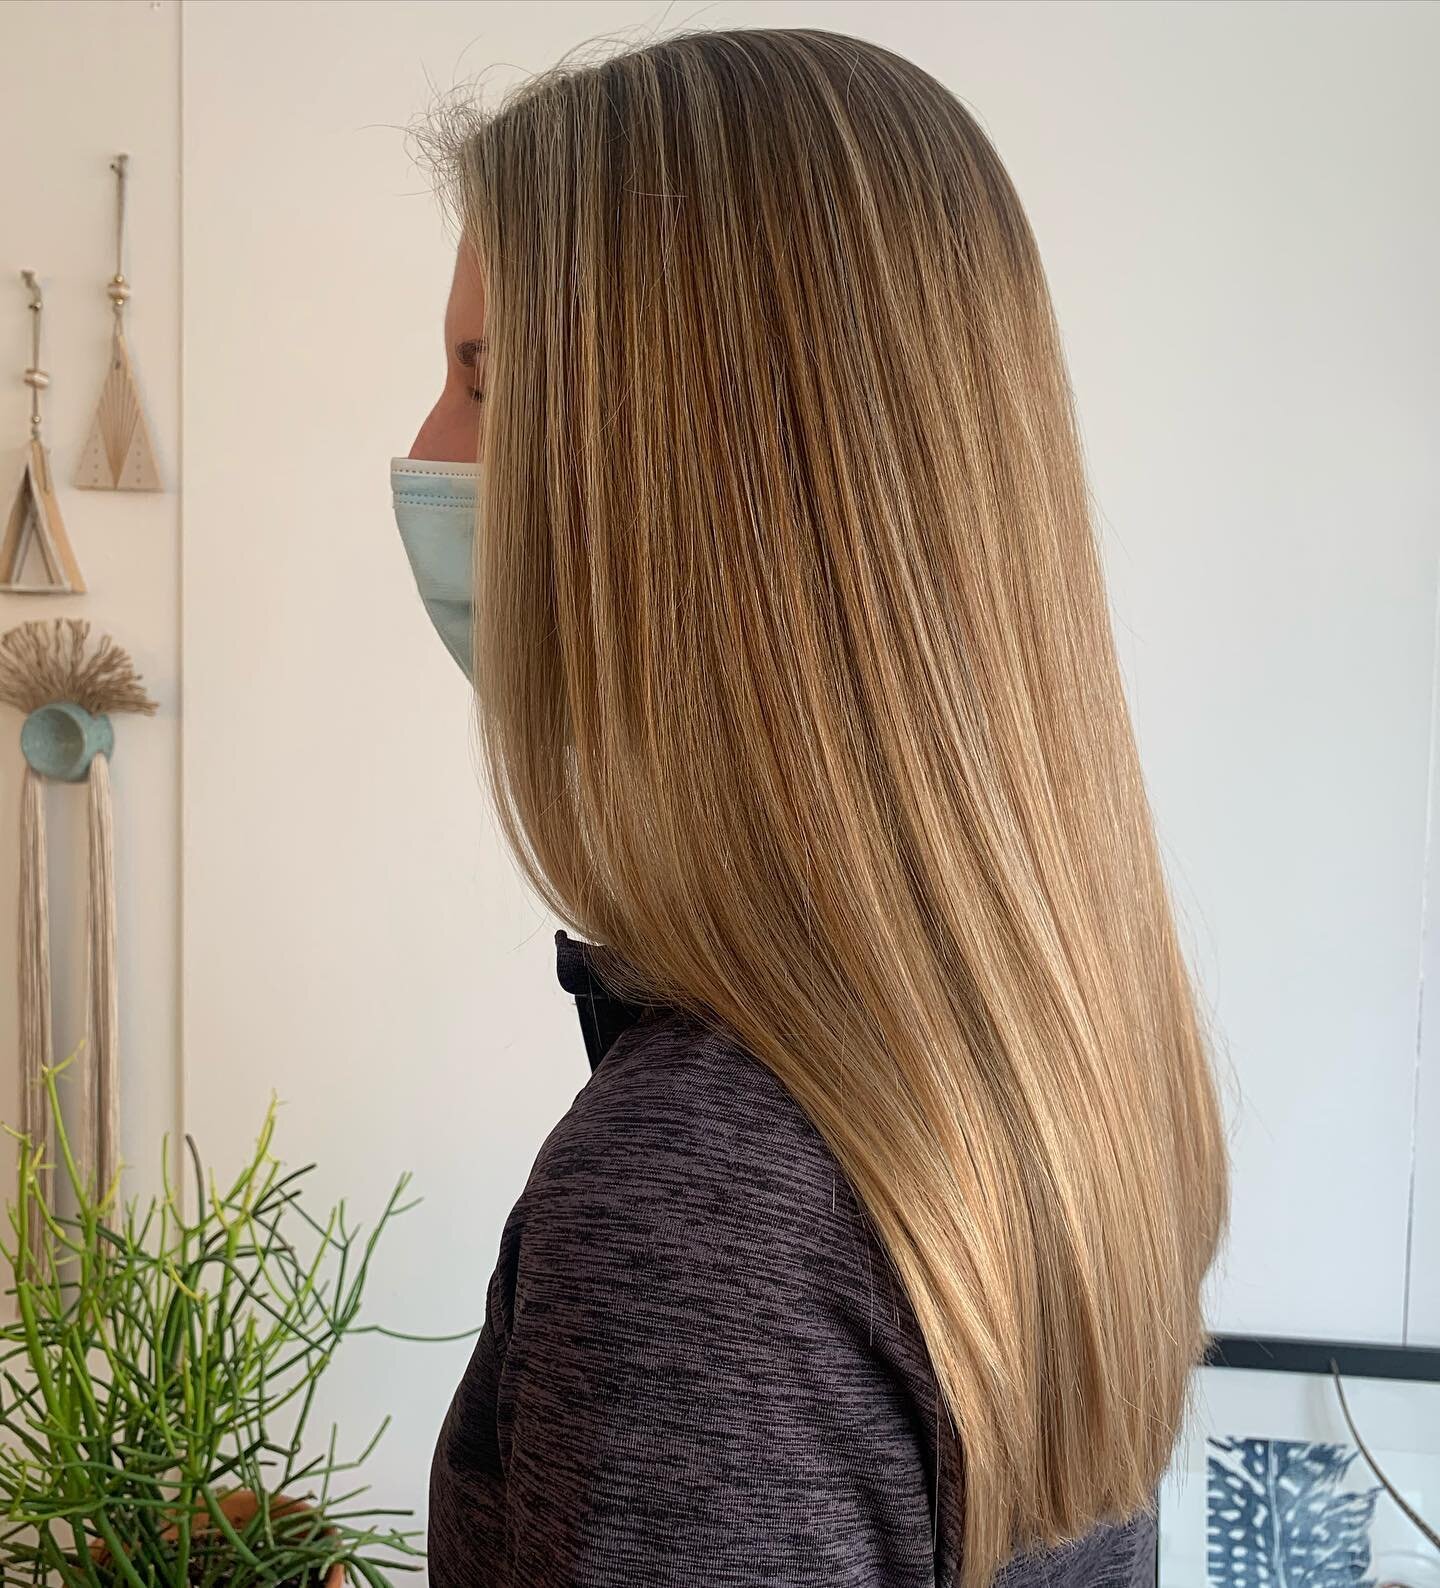 Highlights and a haircut to brighten this February ⭐️ @owayorganics #hbleach #longhair #libertyvillehairstylist #mainstreetlibertyville #lowtoxichaircolor